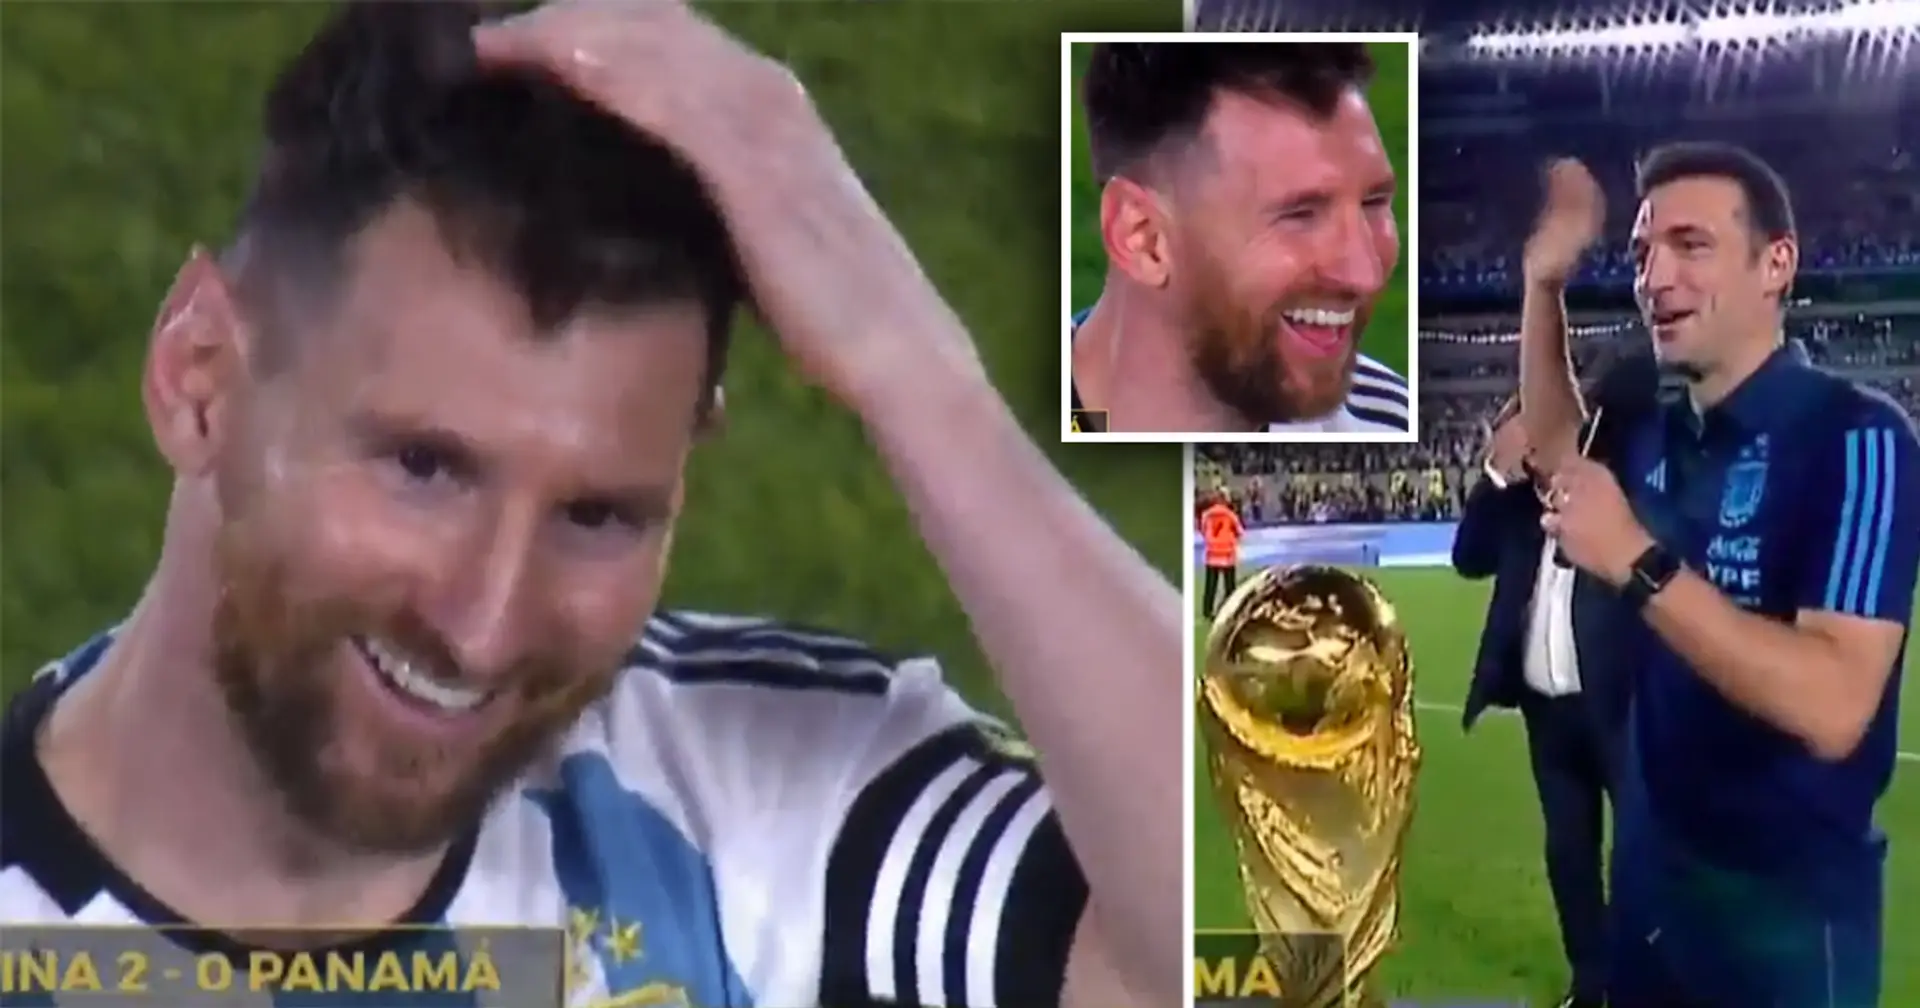 'That's how you treat the GOAT': Scaloni's incredible gesture for Messi that made him feel flattered